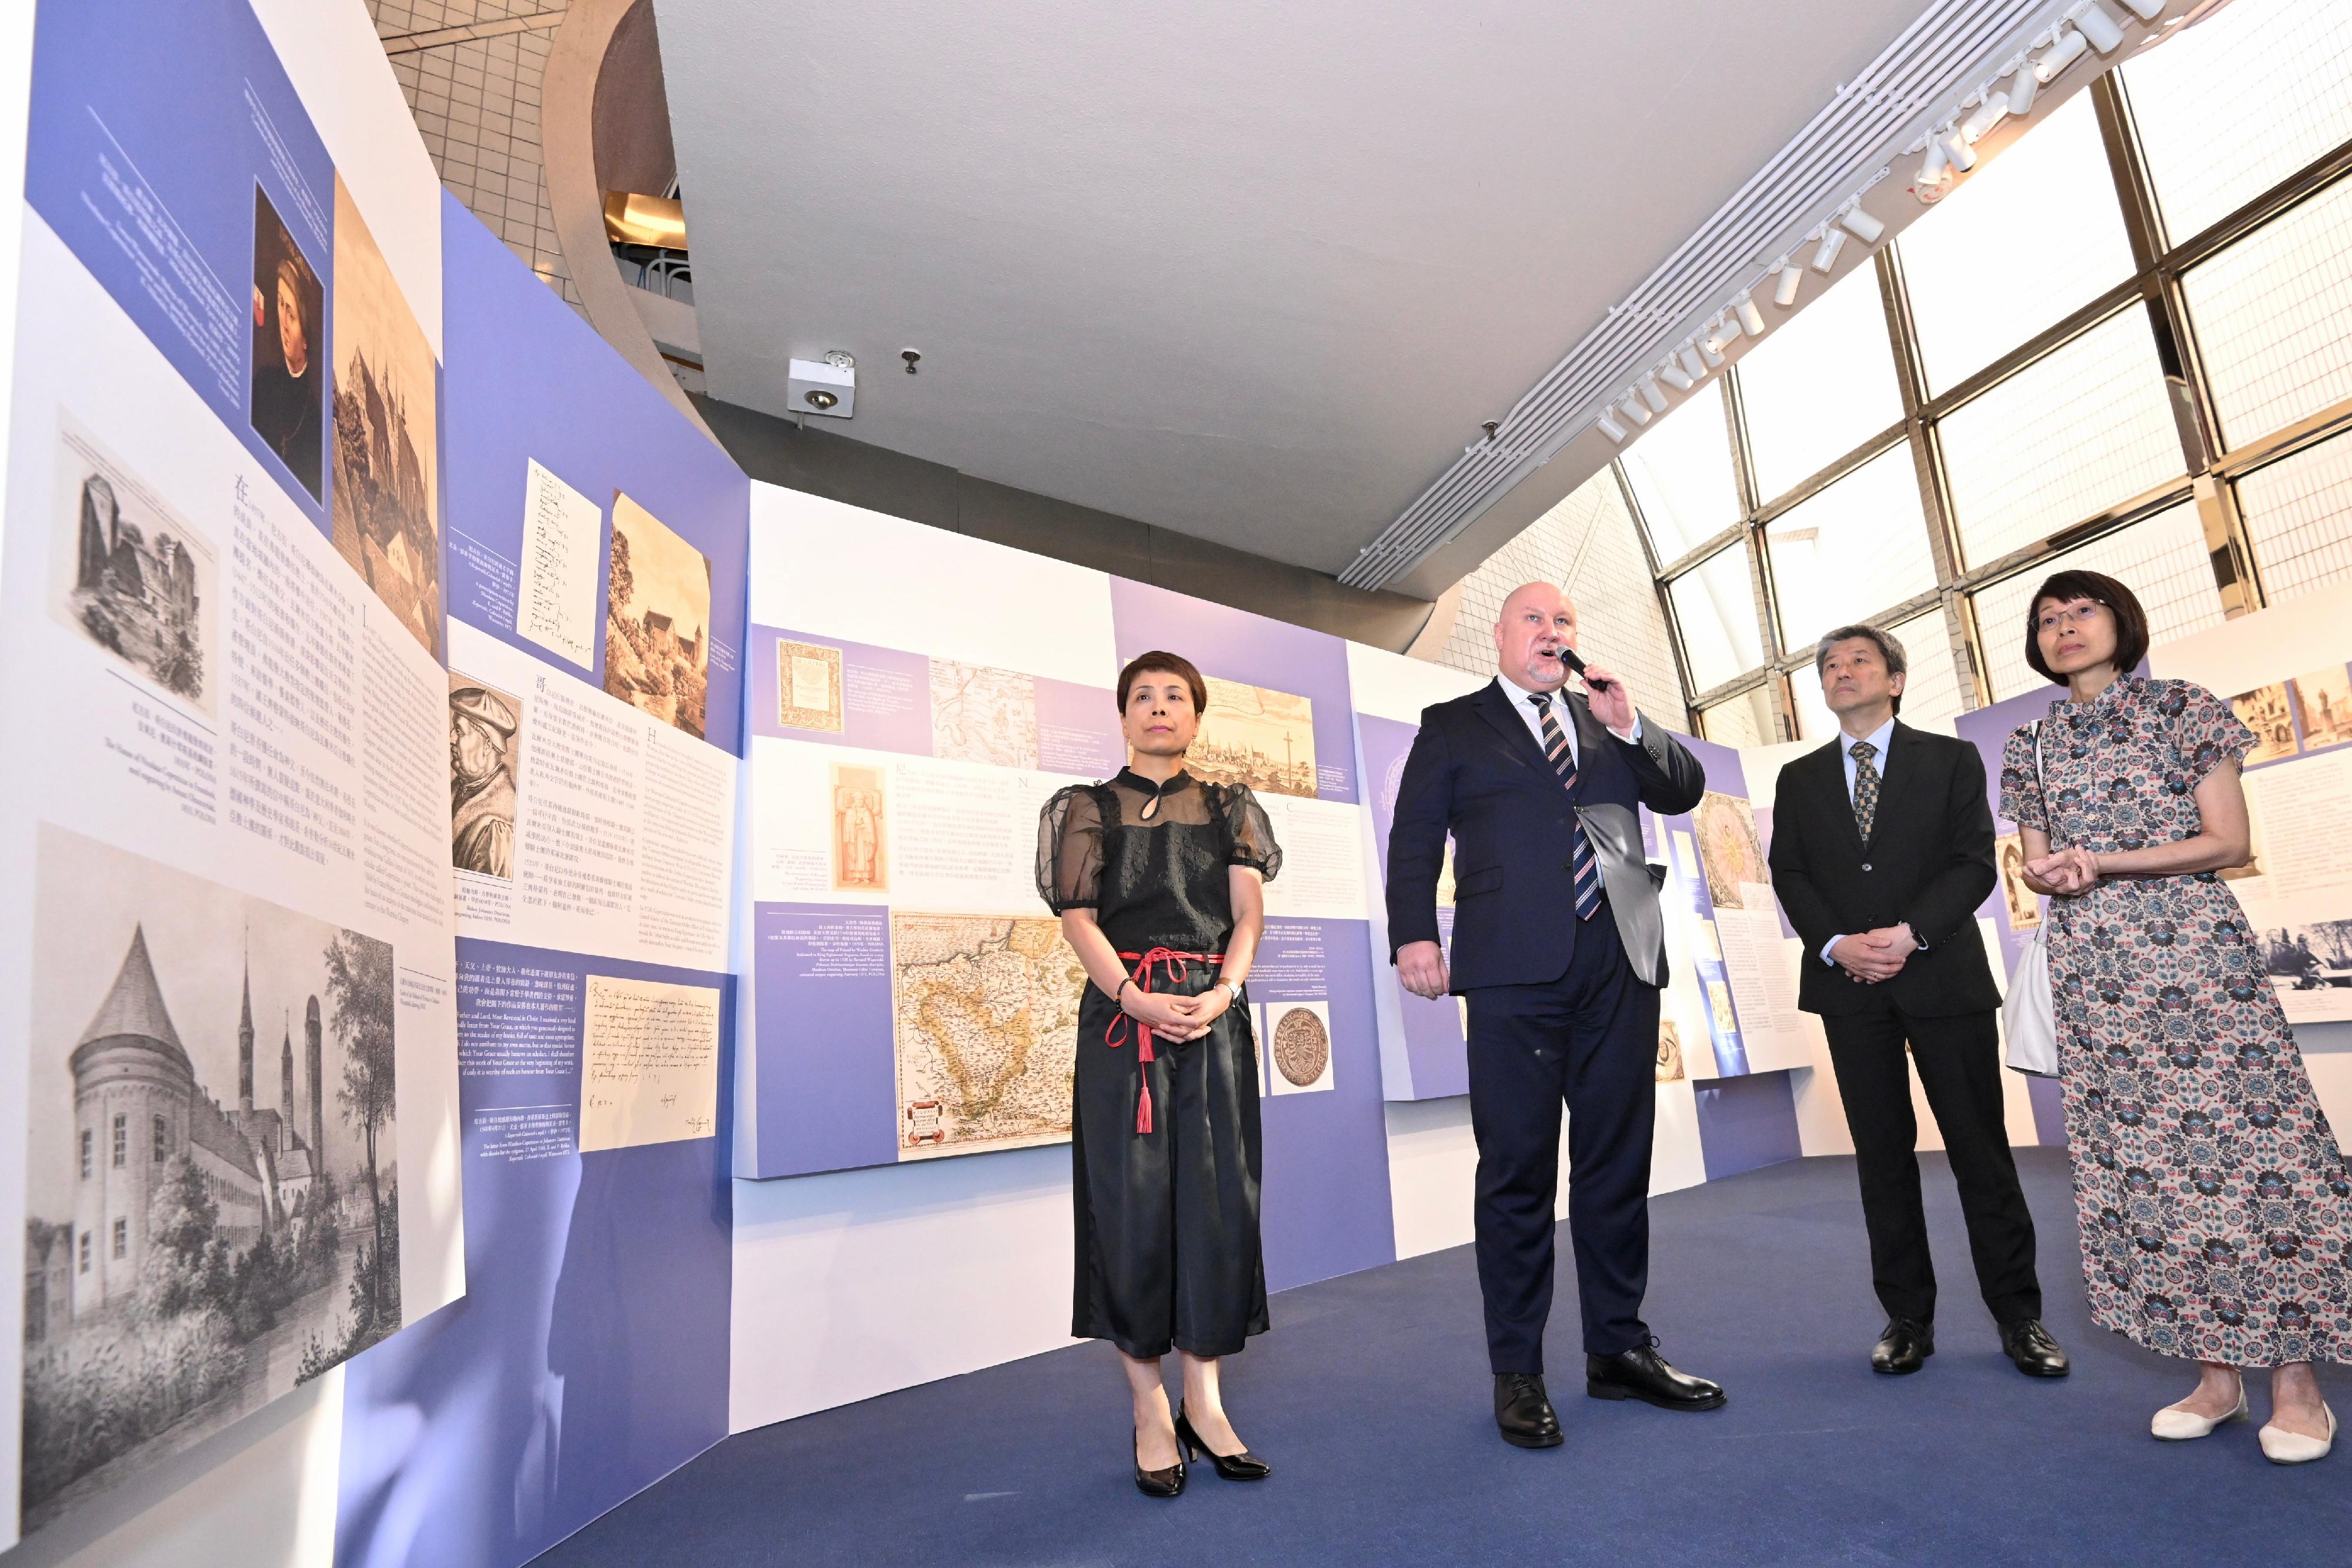 The opening ceremony for the special exhibition "Nicolaus Copernicus: Life and Work" was held today (June 20) at the Hong Kong Space Museum. Photo shows (from left) the Acting Director of Leisure and Cultural Services, Miss Eve Tam; the Consul General of the Republic of Poland in Hong Kong, Dr Aleksander Dańda; the Museum Director of the Hong Kong Science Museum, Mr Lawrence Lee; and the Assistant Director of Leisure and Cultural Services (Heritage and Museums), Ms Esa Leung, touring the exhibition as officiating guests.